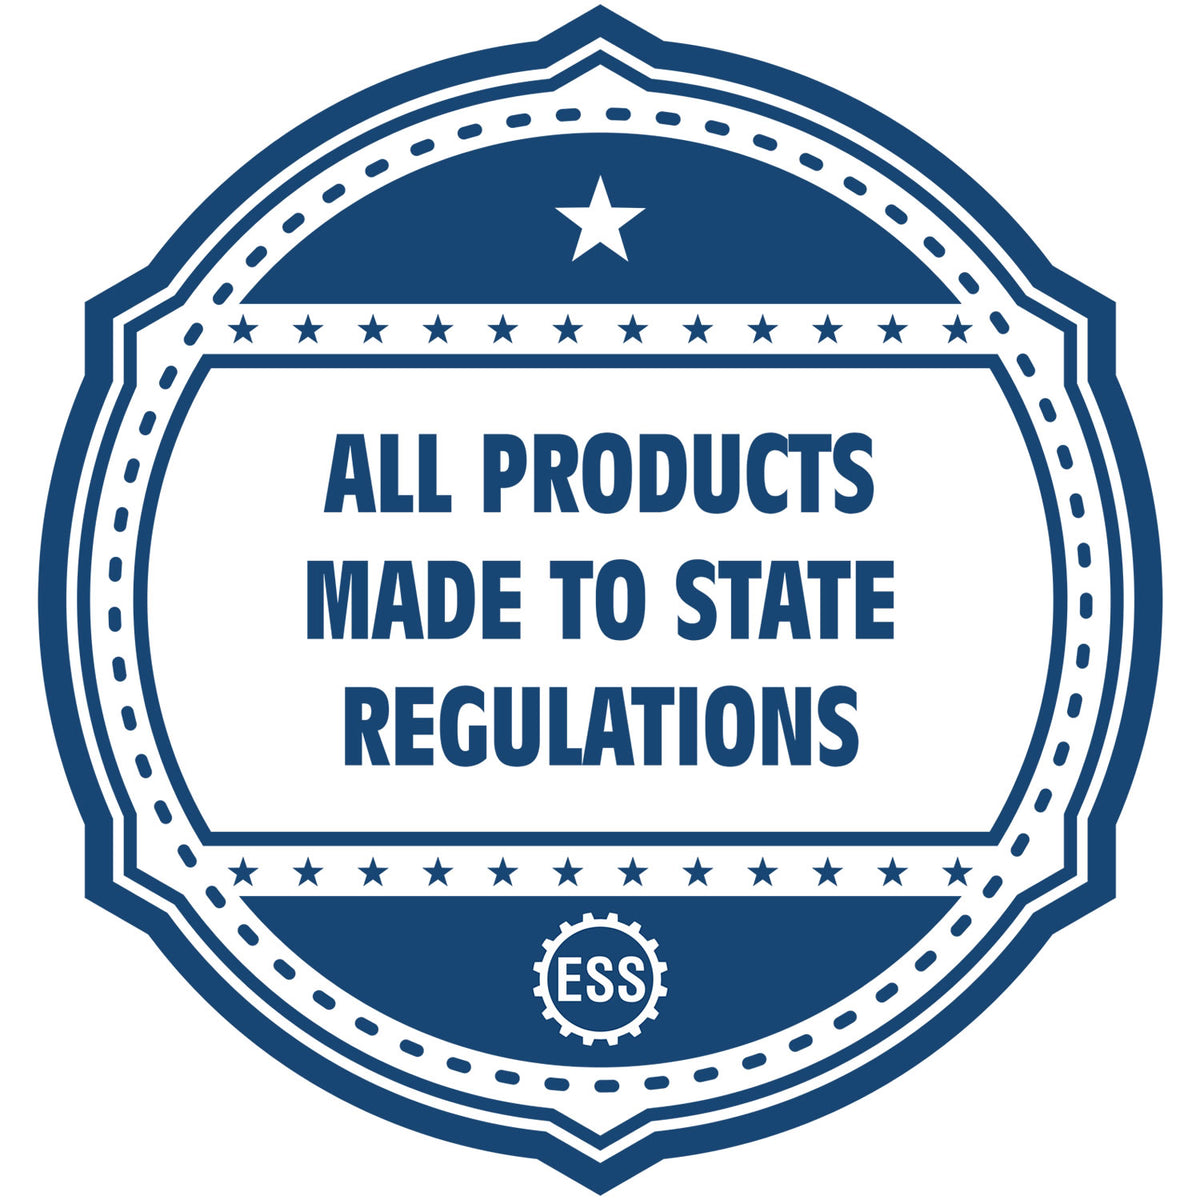 An icon or badge element for the MaxLight Premium Pre-Inked South Carolina State Seal Notarial Stamp showing that this product is made in compliance with state regulations.